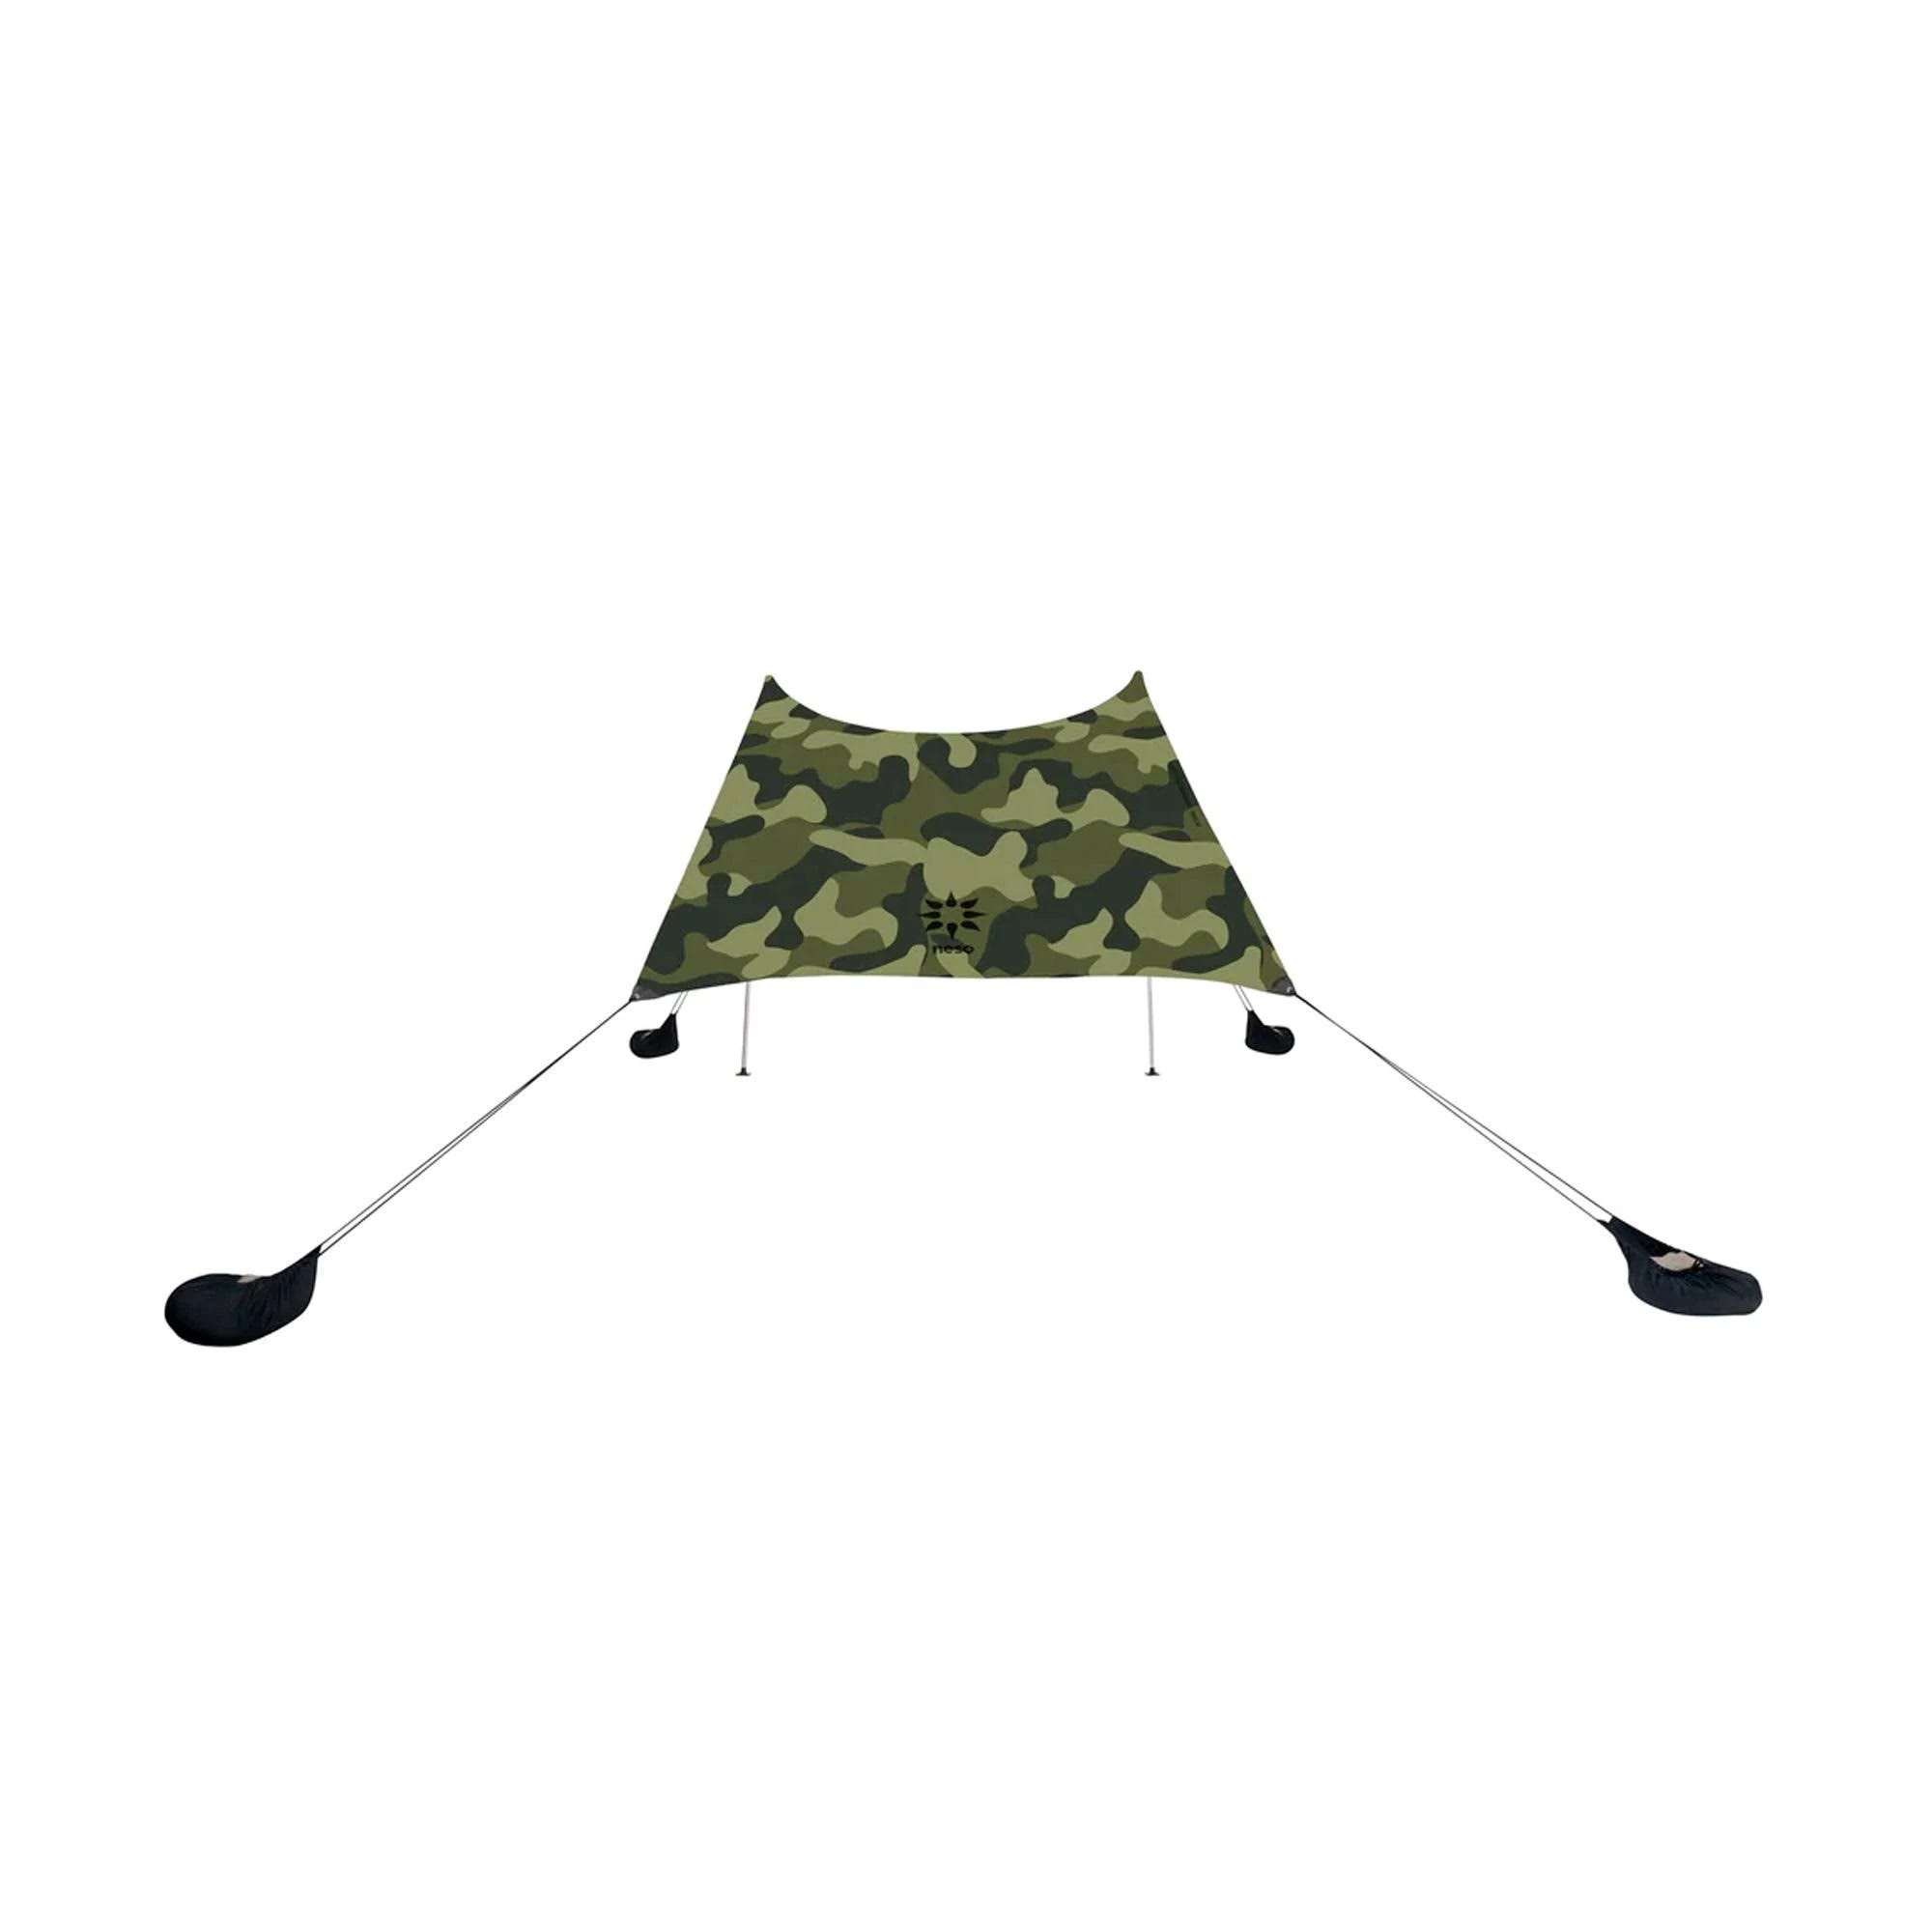 Neso Grande Lightweight Beach Tent with Sun Protection and Cooler Pocket (Camo) | Image